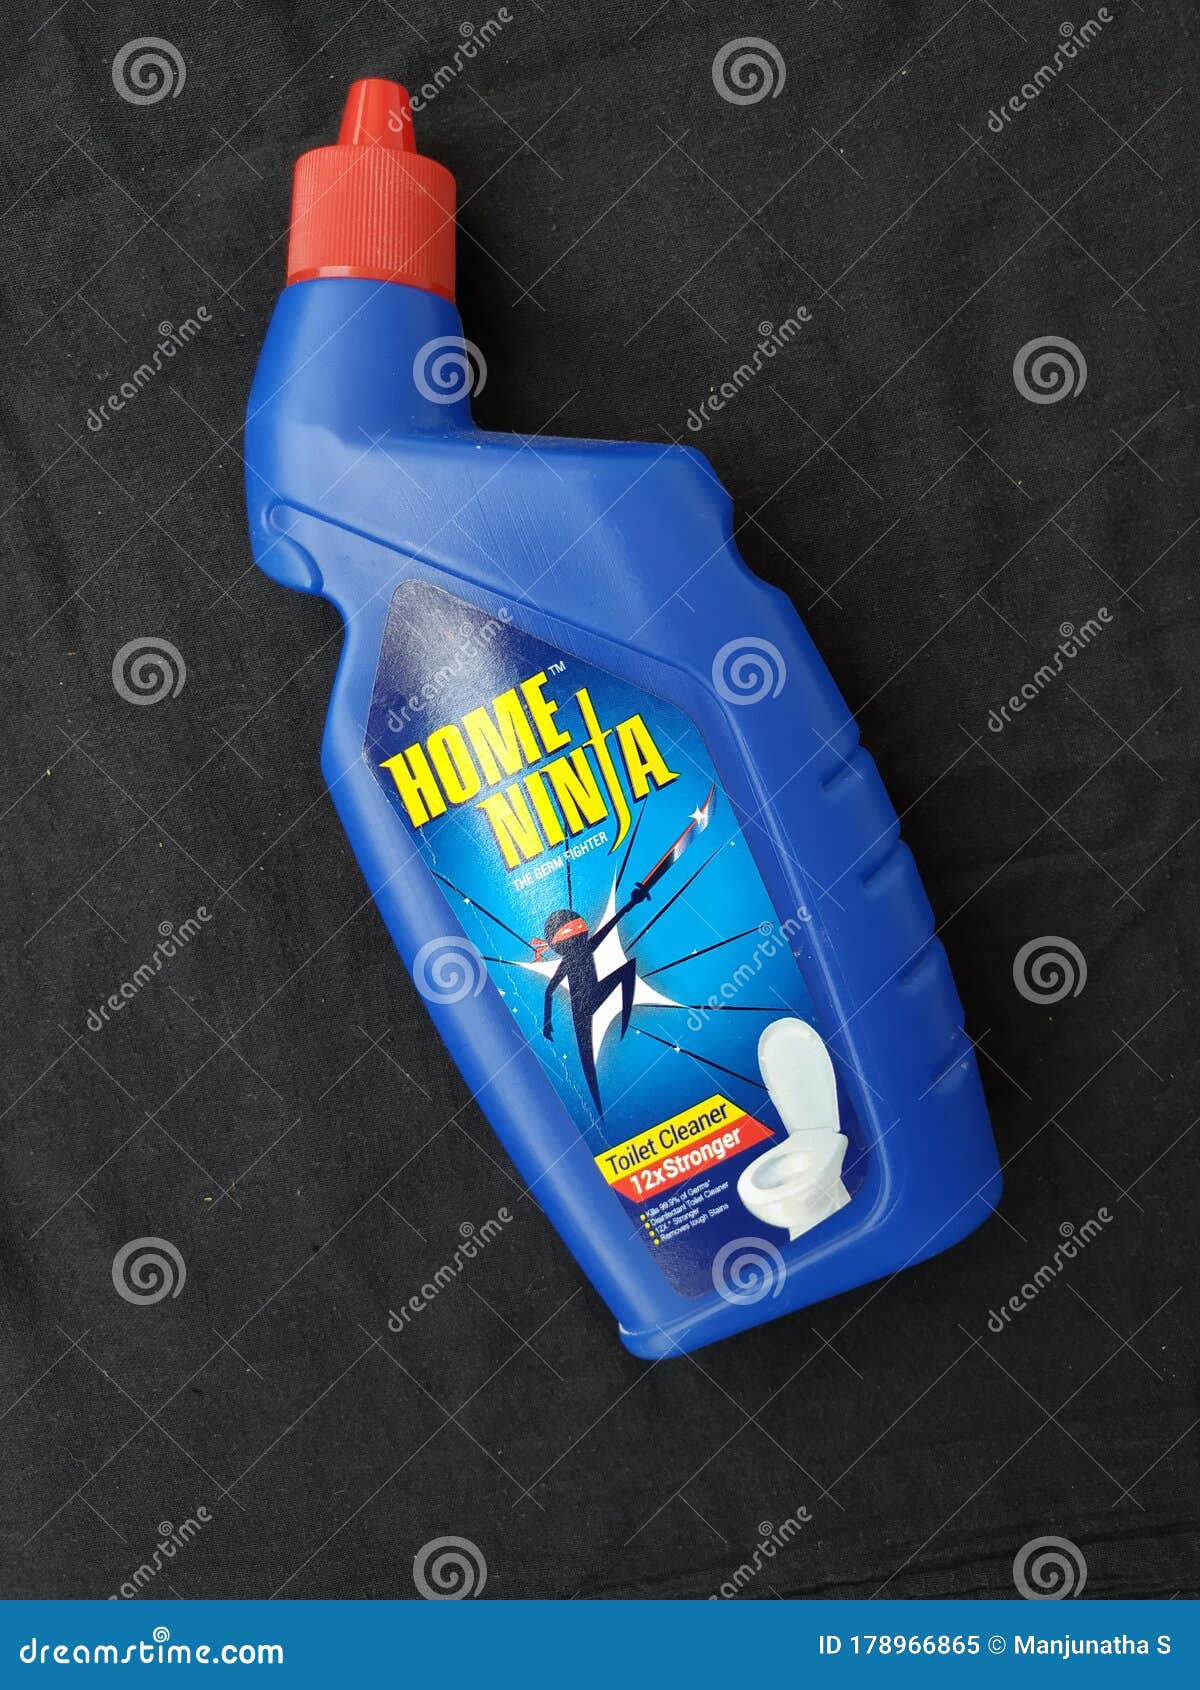 Closeup of Home Ninja Toilet Cleaner 12x Stronger Blue Color Plastic  Container Isolated on Black Background Editorial Image - Image of care,  cleaner: 178966865